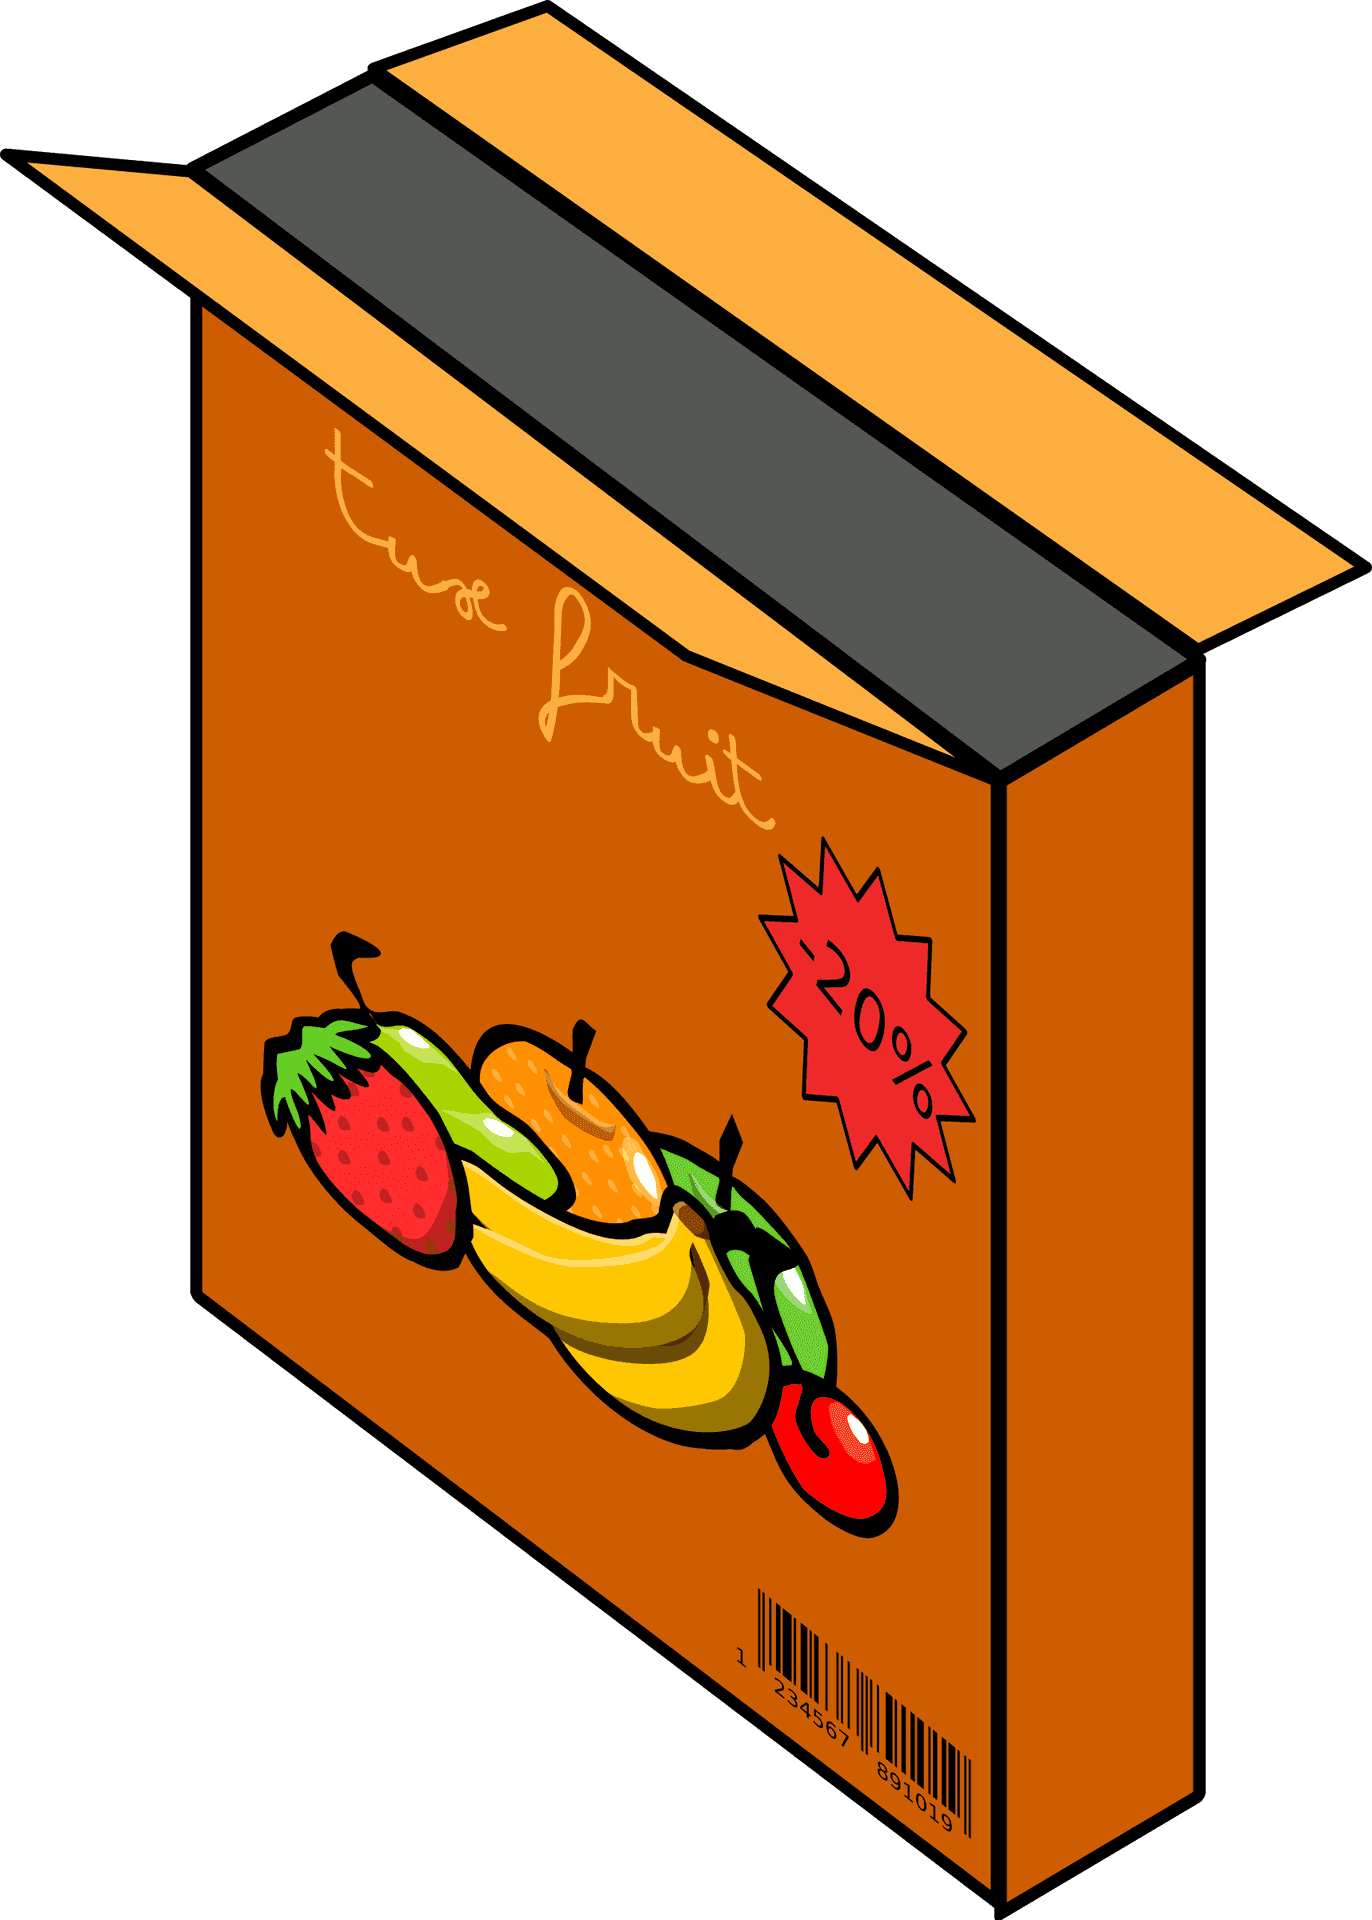 Fruit Themed Cereal Box Discount Offer PNG image